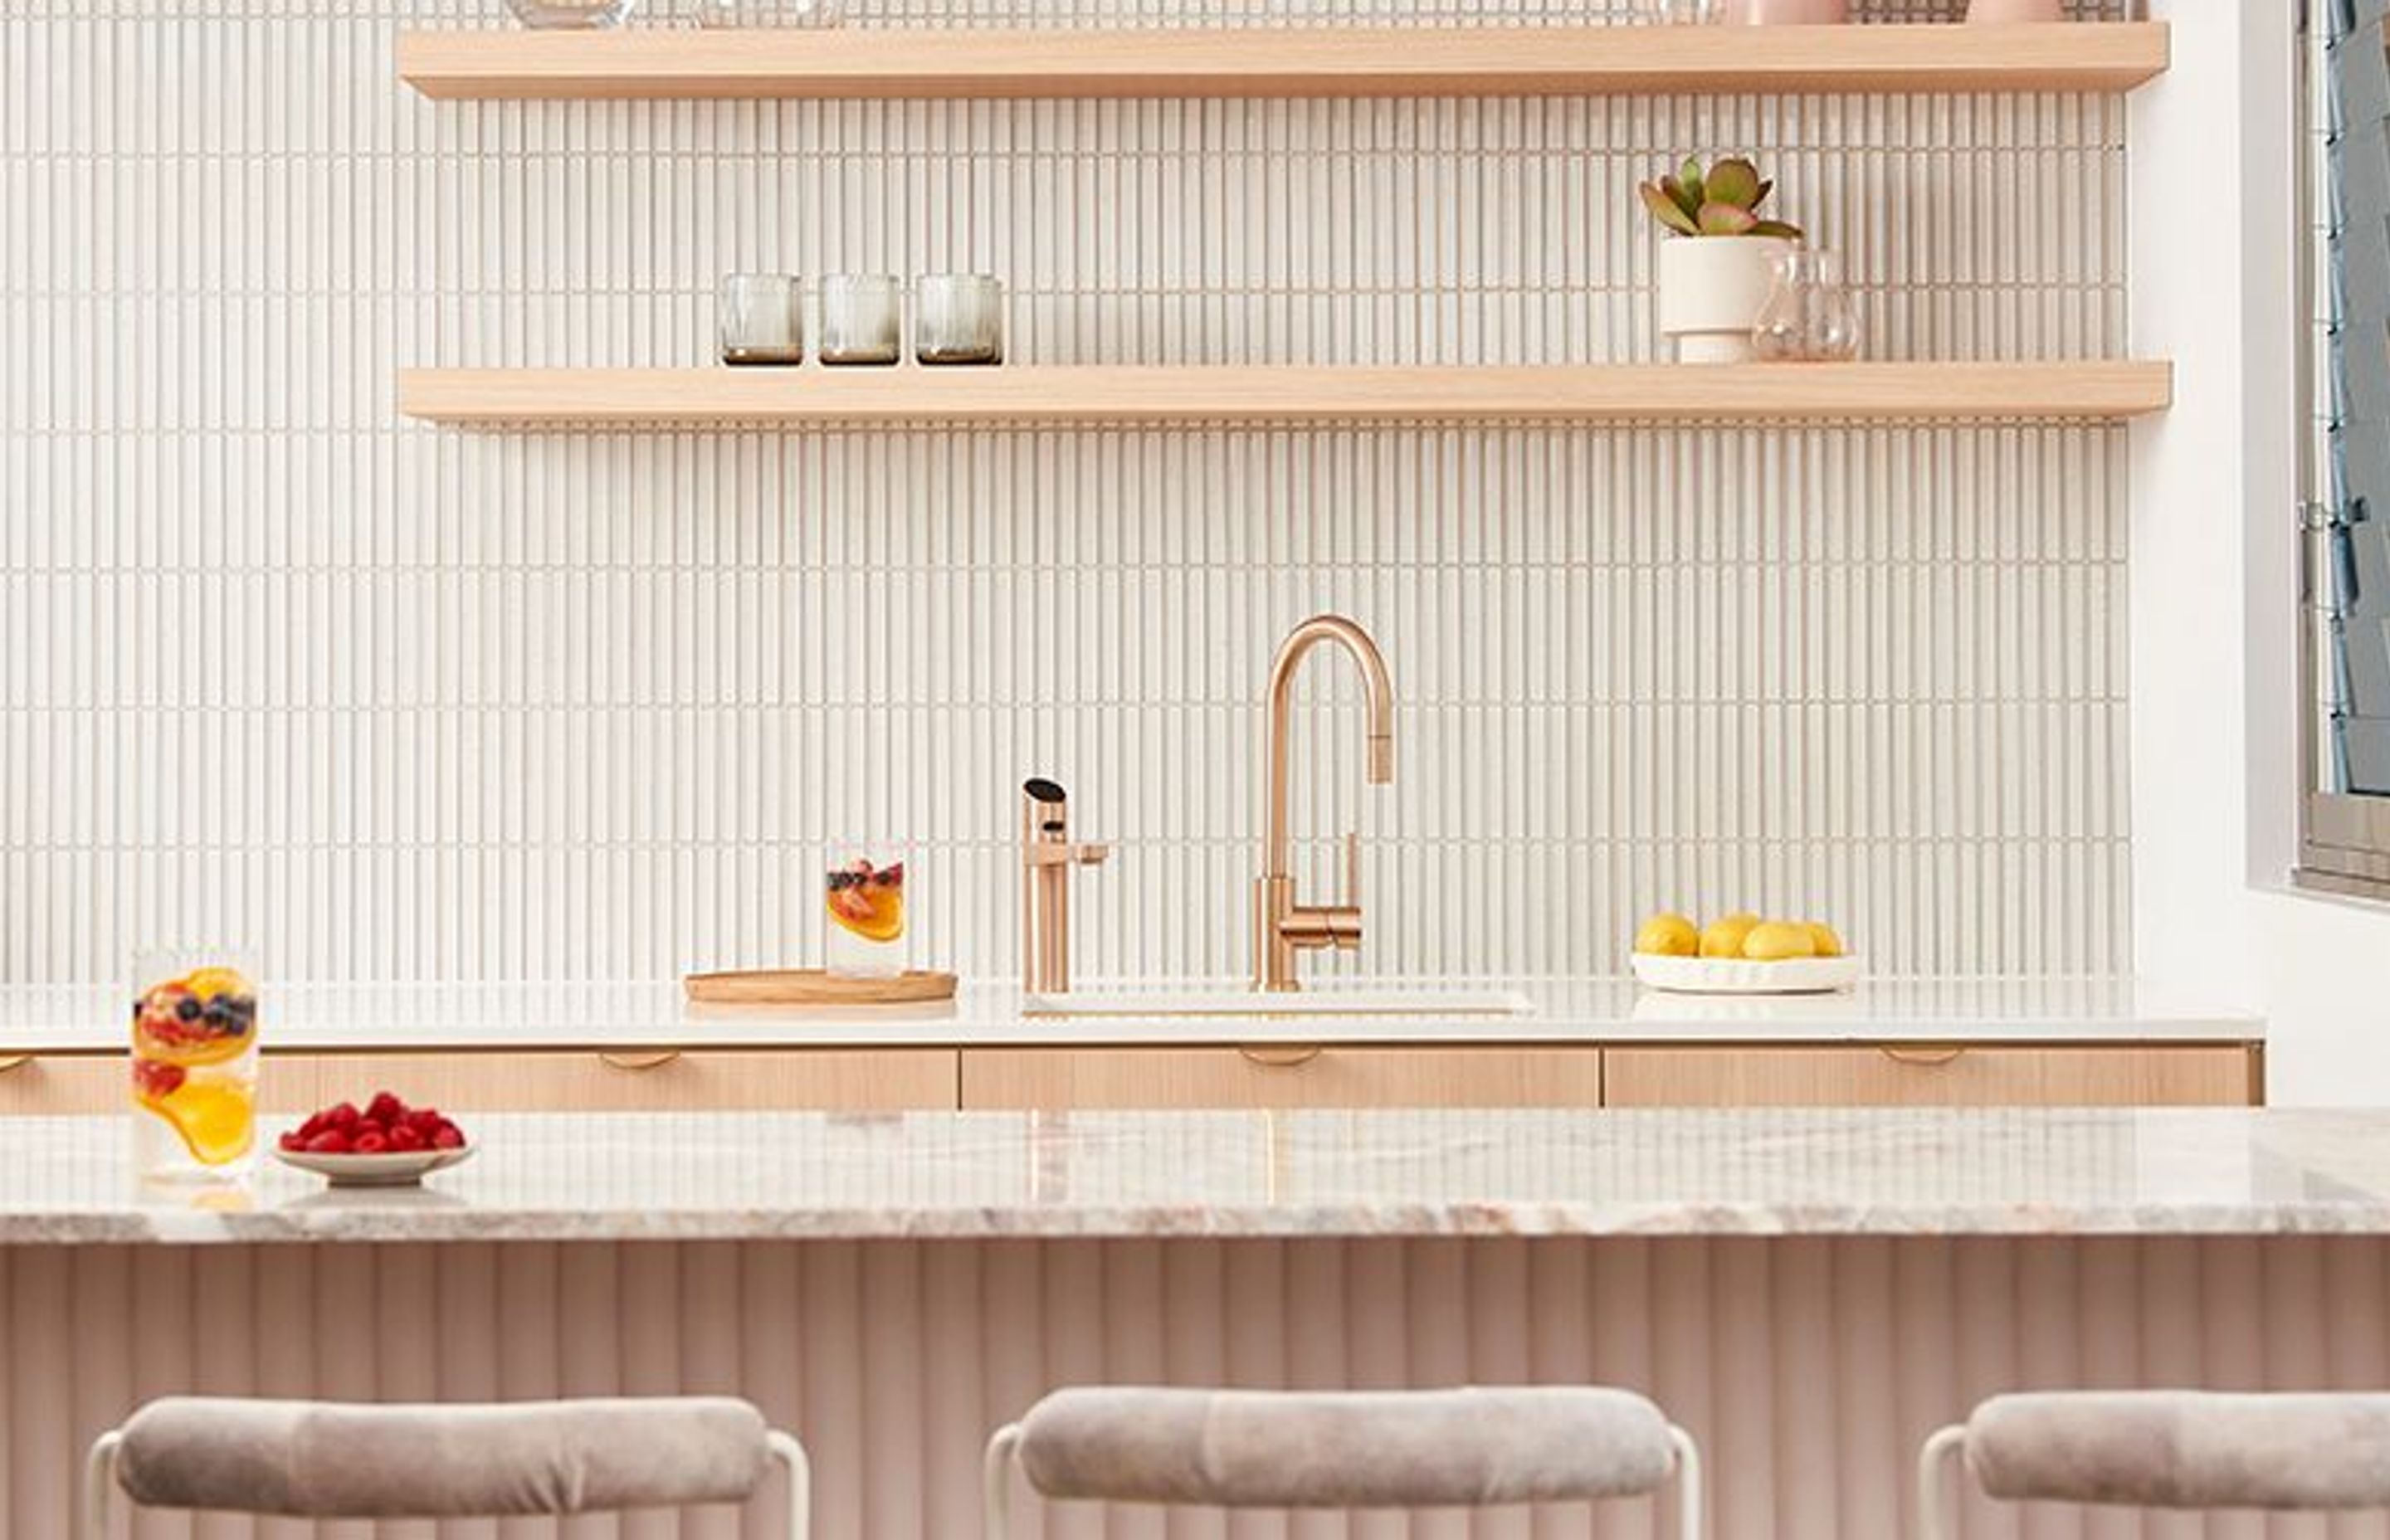 Add the lustre of gold to your kitchen